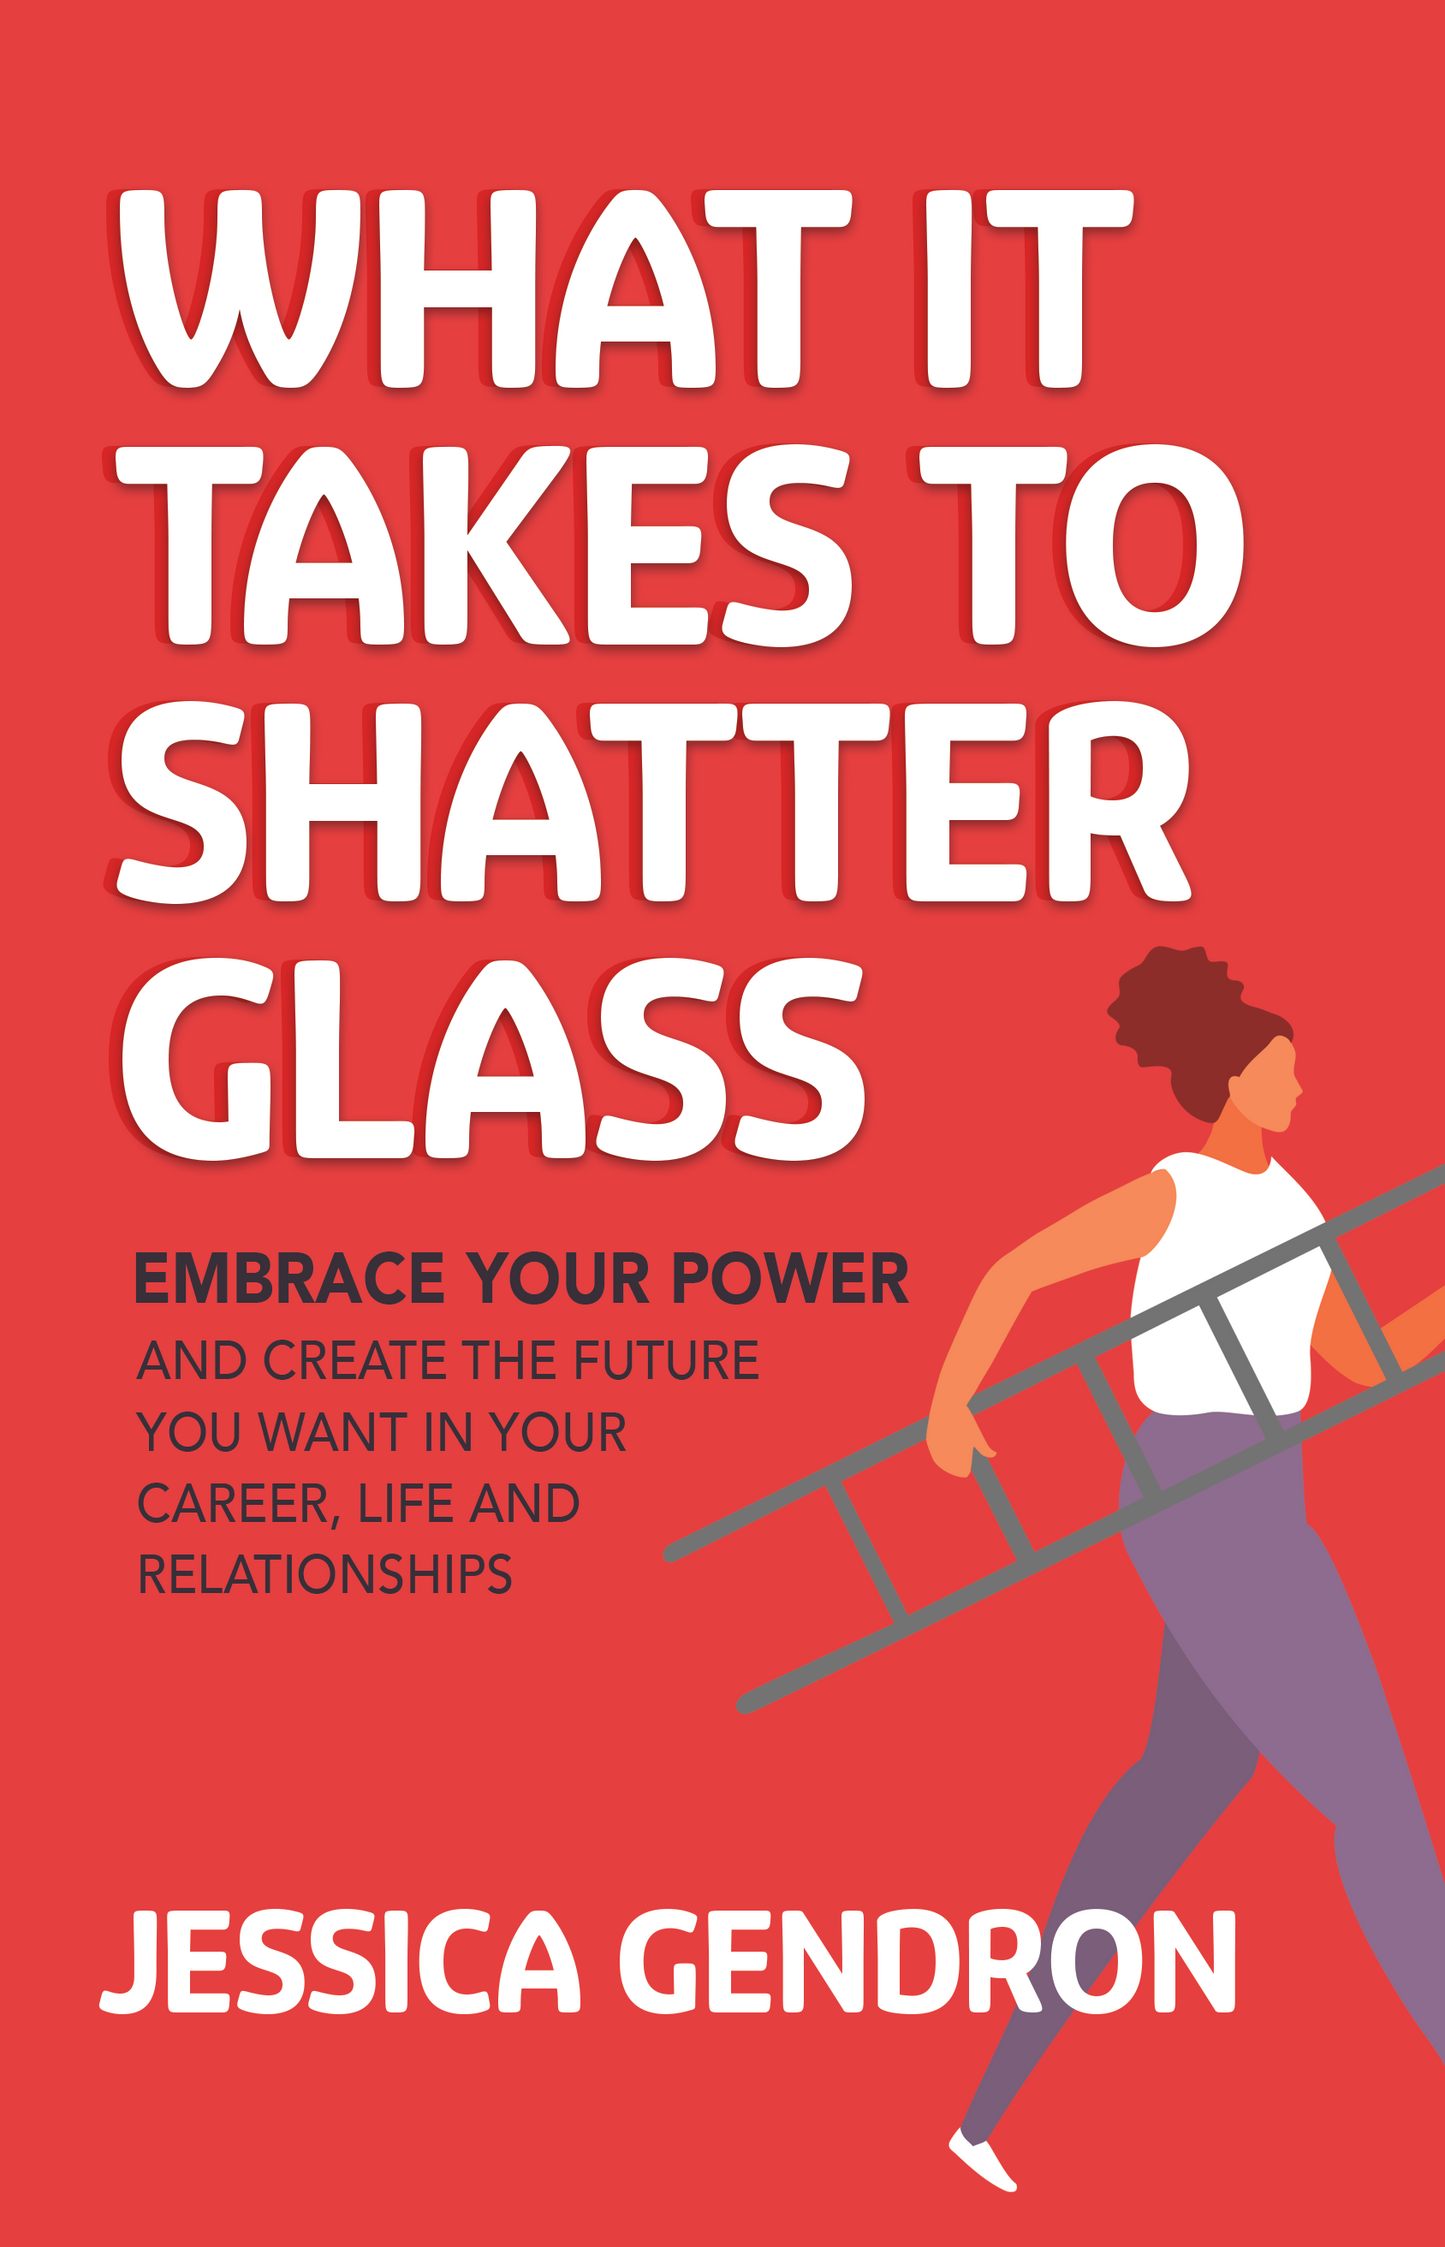 What It Takes to Shatter Glass: Embrace Your Power and Create the Future You Want in Your Career, Life, and Relationships